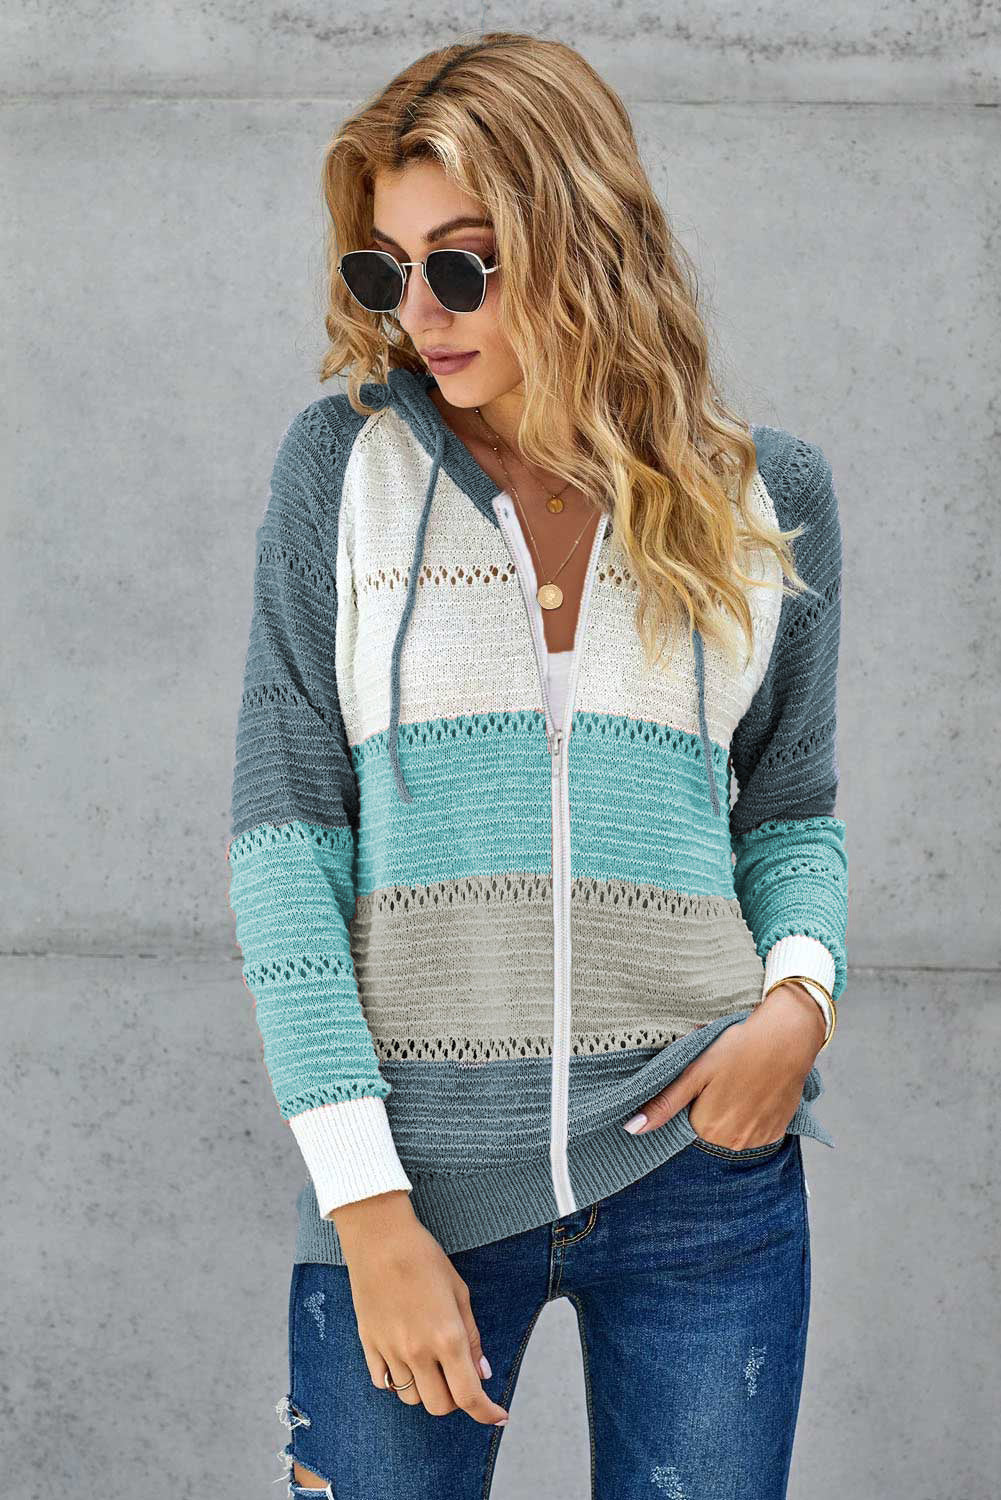 color Zipped Front Colorblock Hollow-out Knit Hoodie